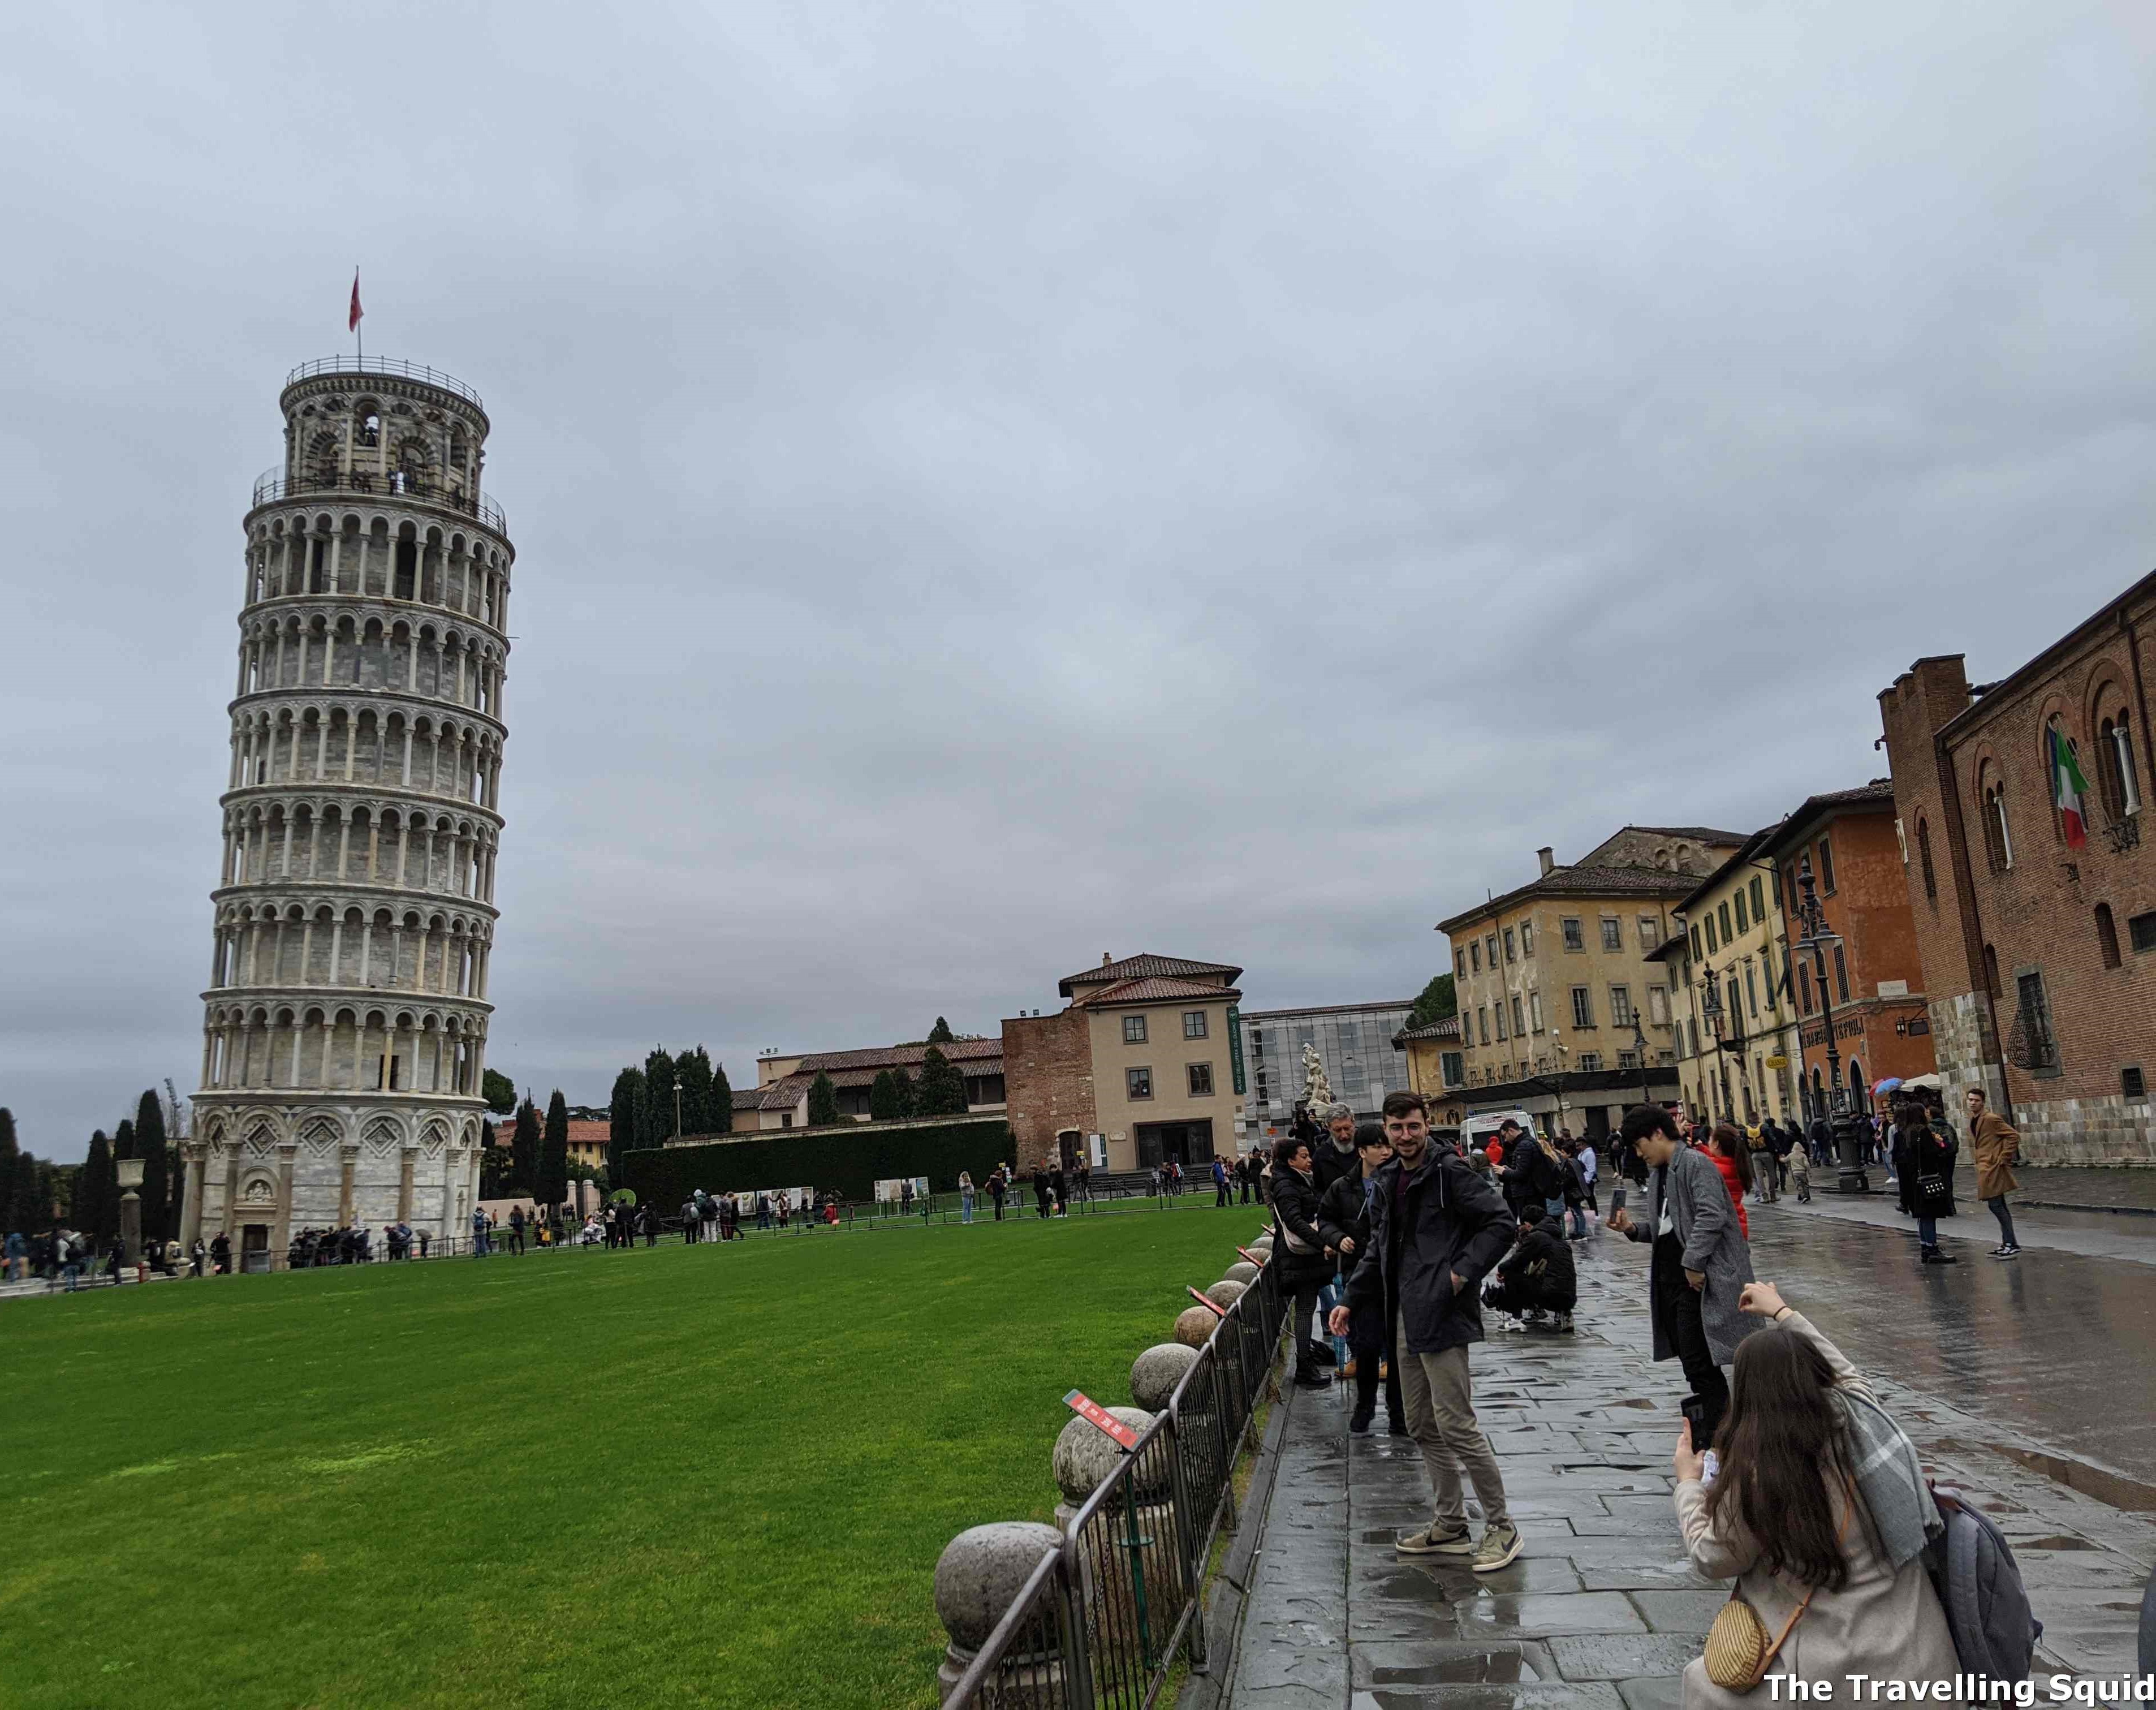 paying to climb up the Leaning Tower of Pisa